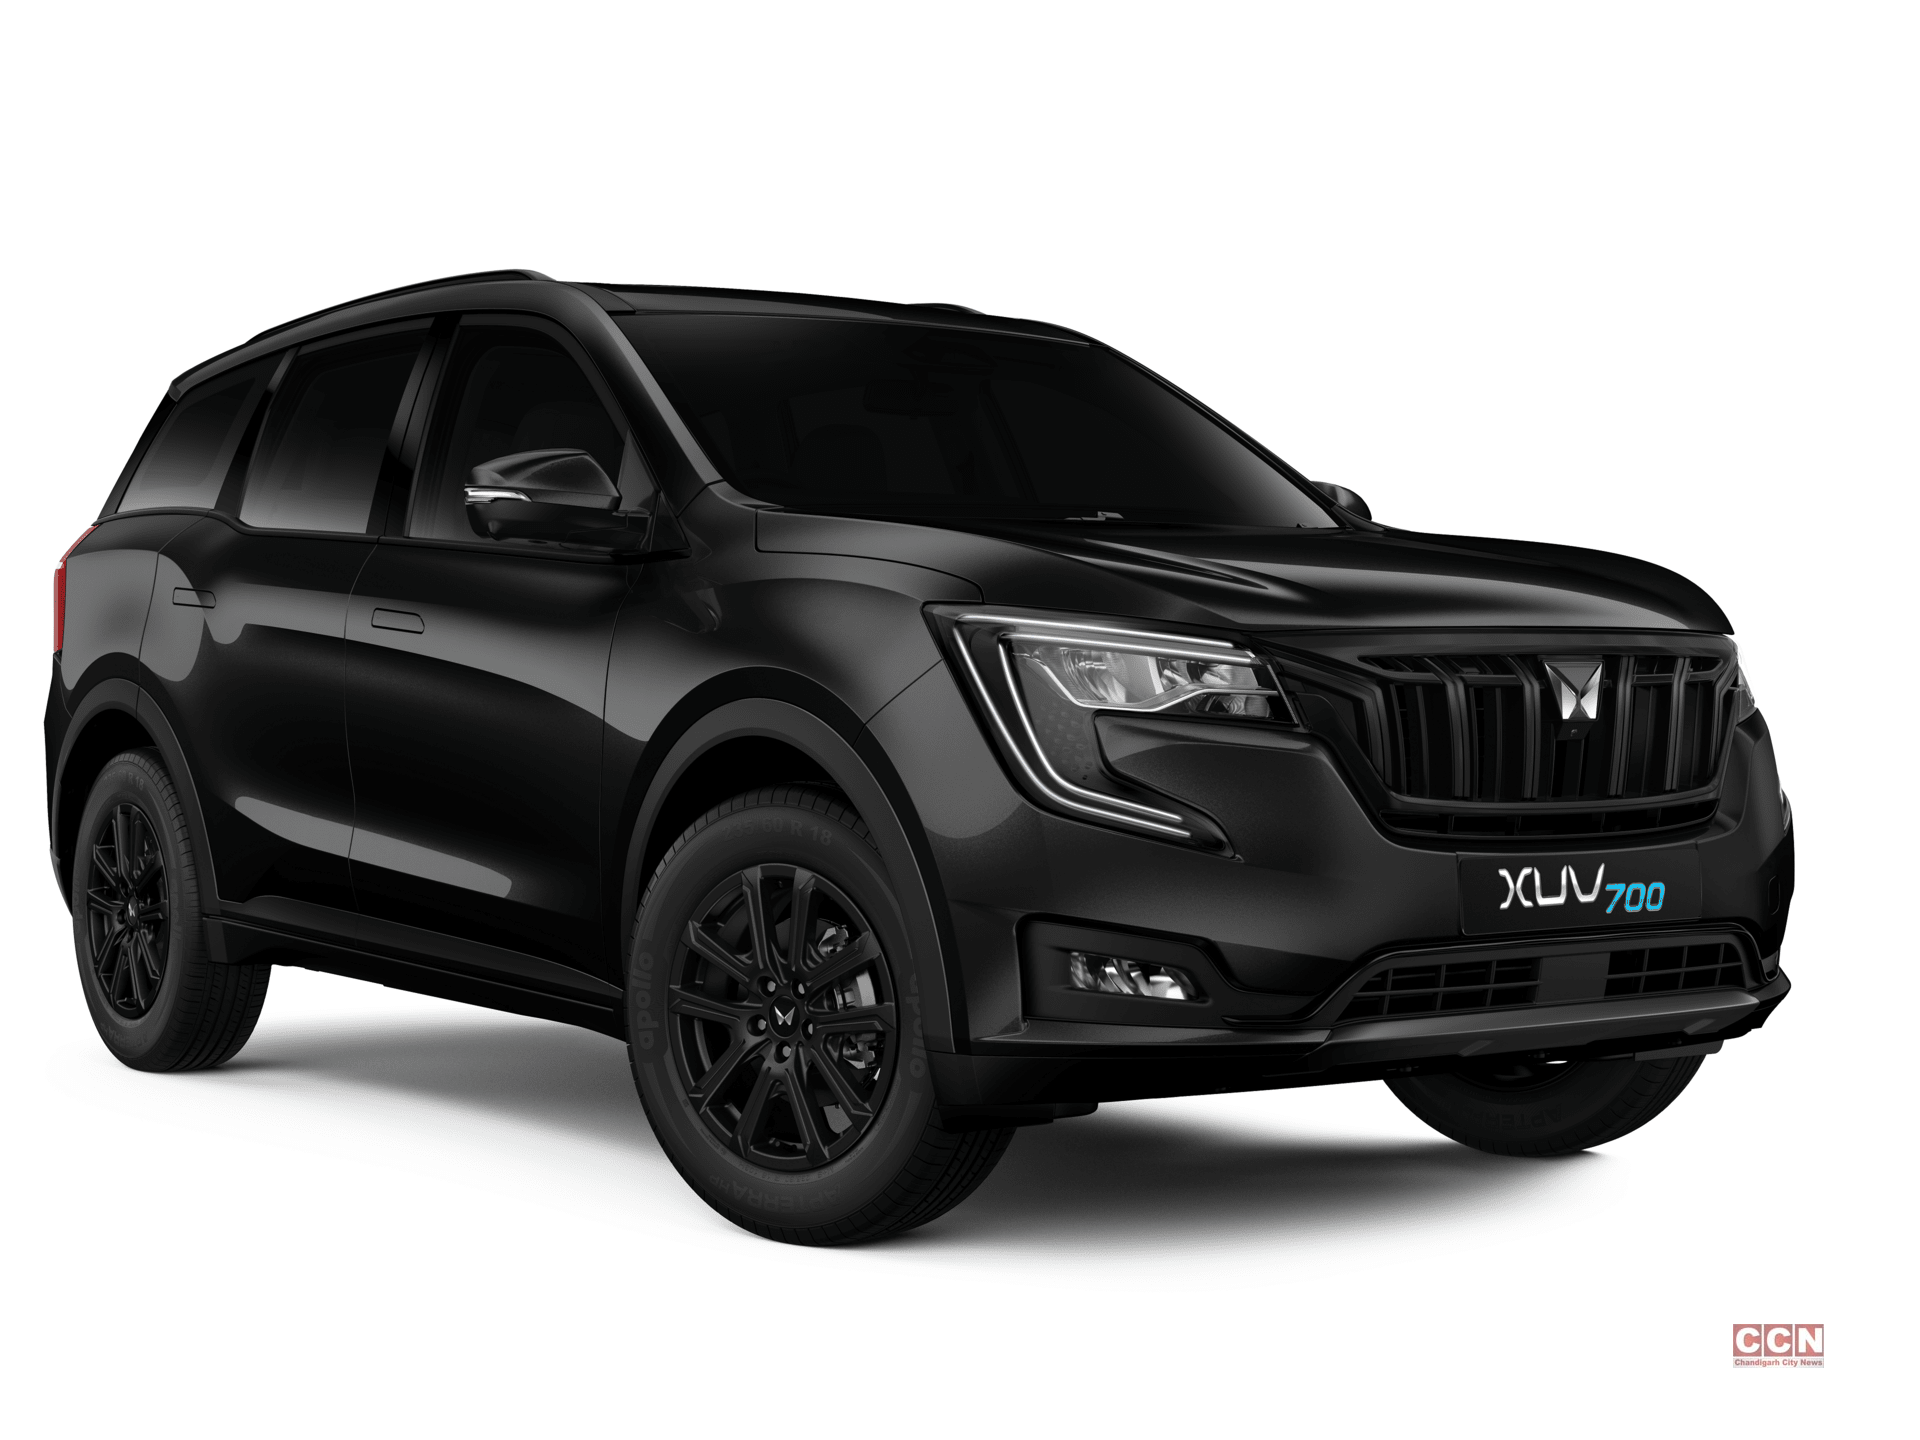 Fast Forward to The Big League Say Hello to Mahindra XUV700's Fully-loaded AX7 Range now starting at 19.49 Lakh